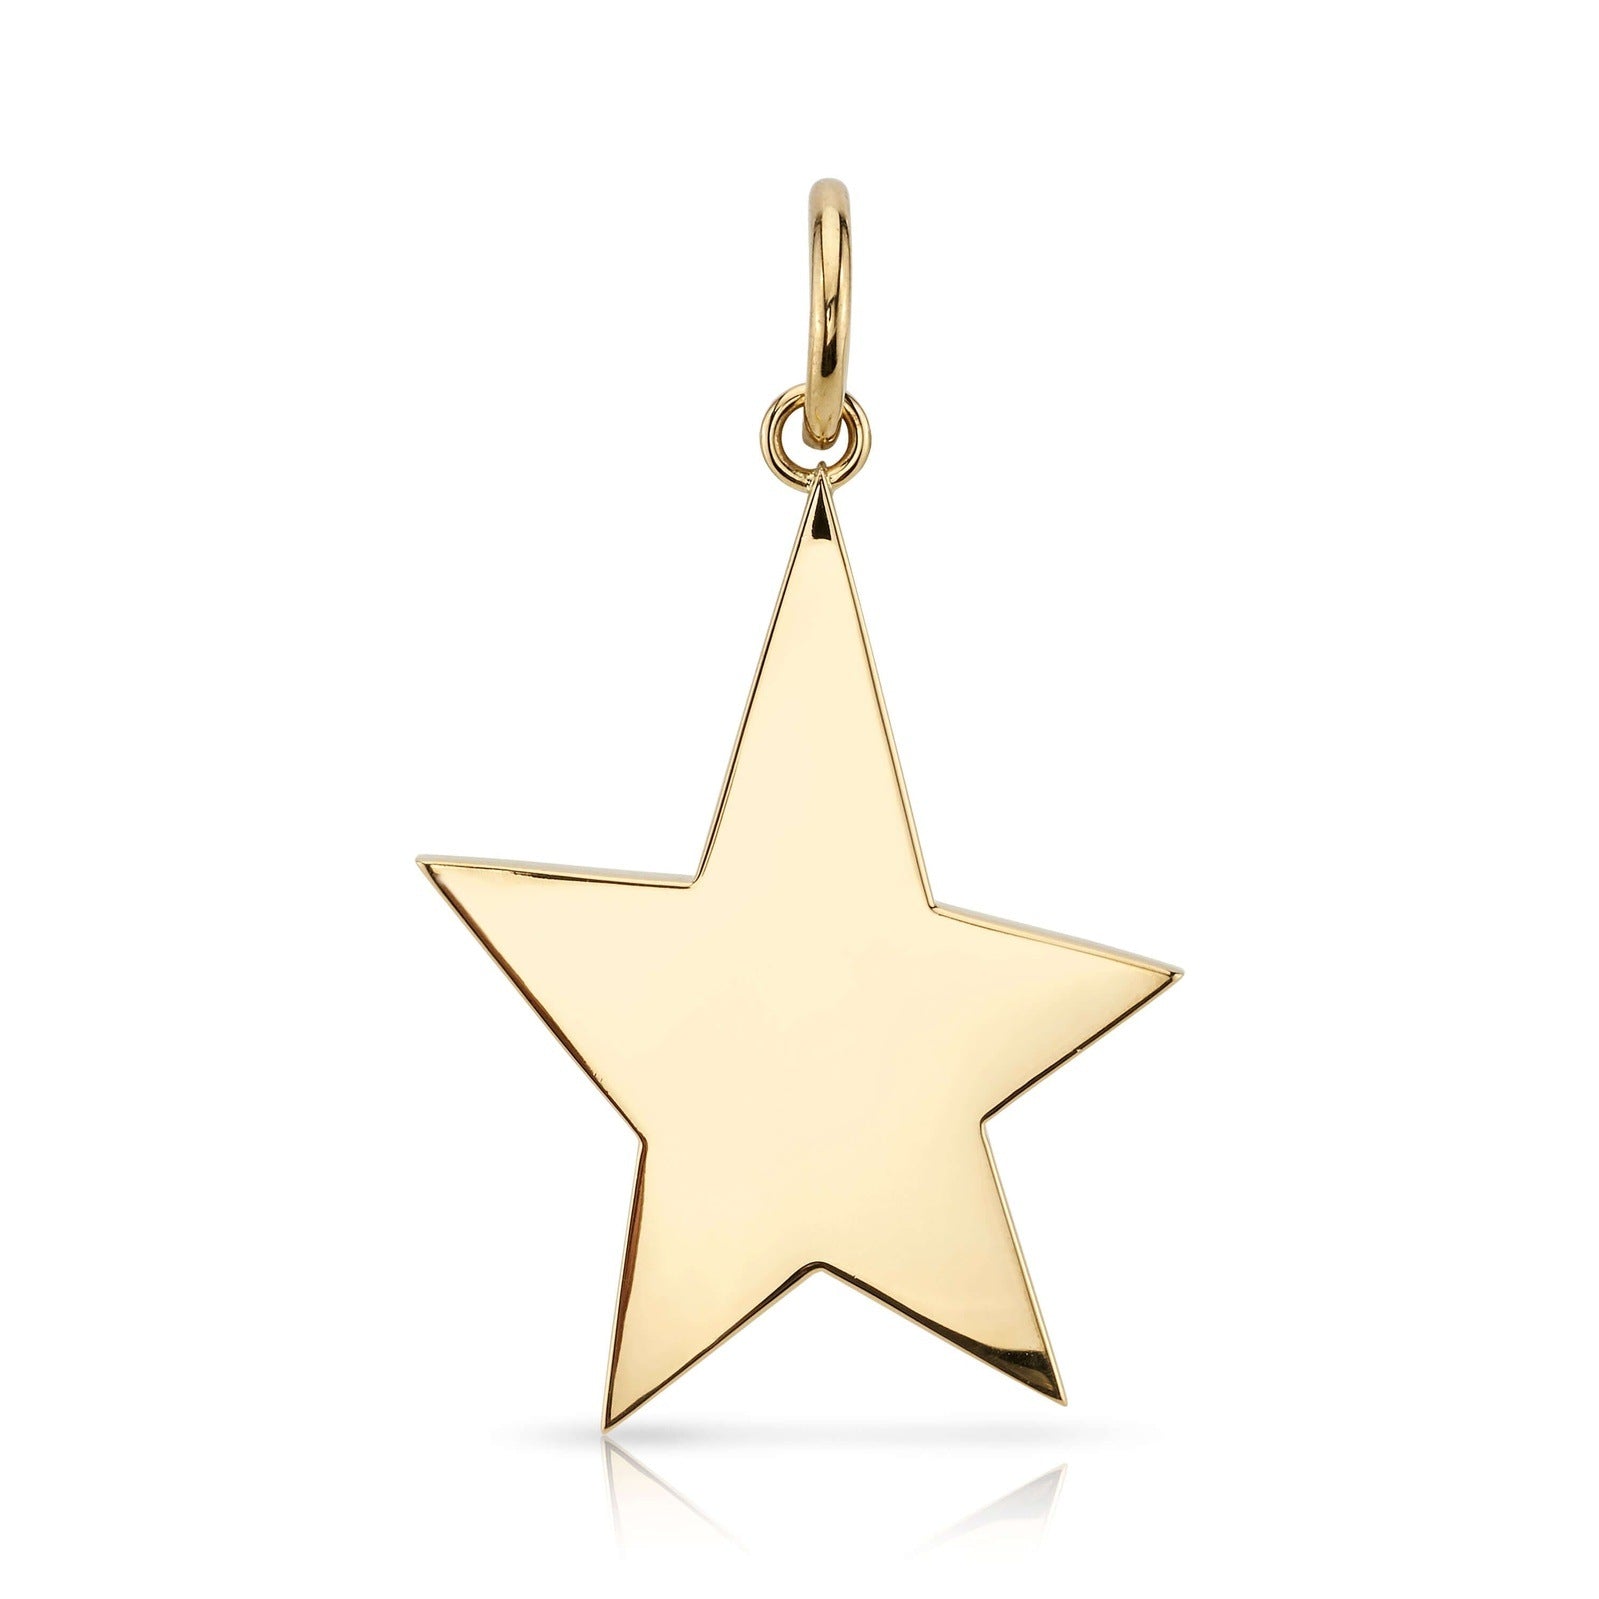 SINGLE STONE LARGE KINSLEY PENDANT featuring Handcrafted 18K yellow gold star charm. Charm measures 30mm x 40mm. Price does not include bracelet.